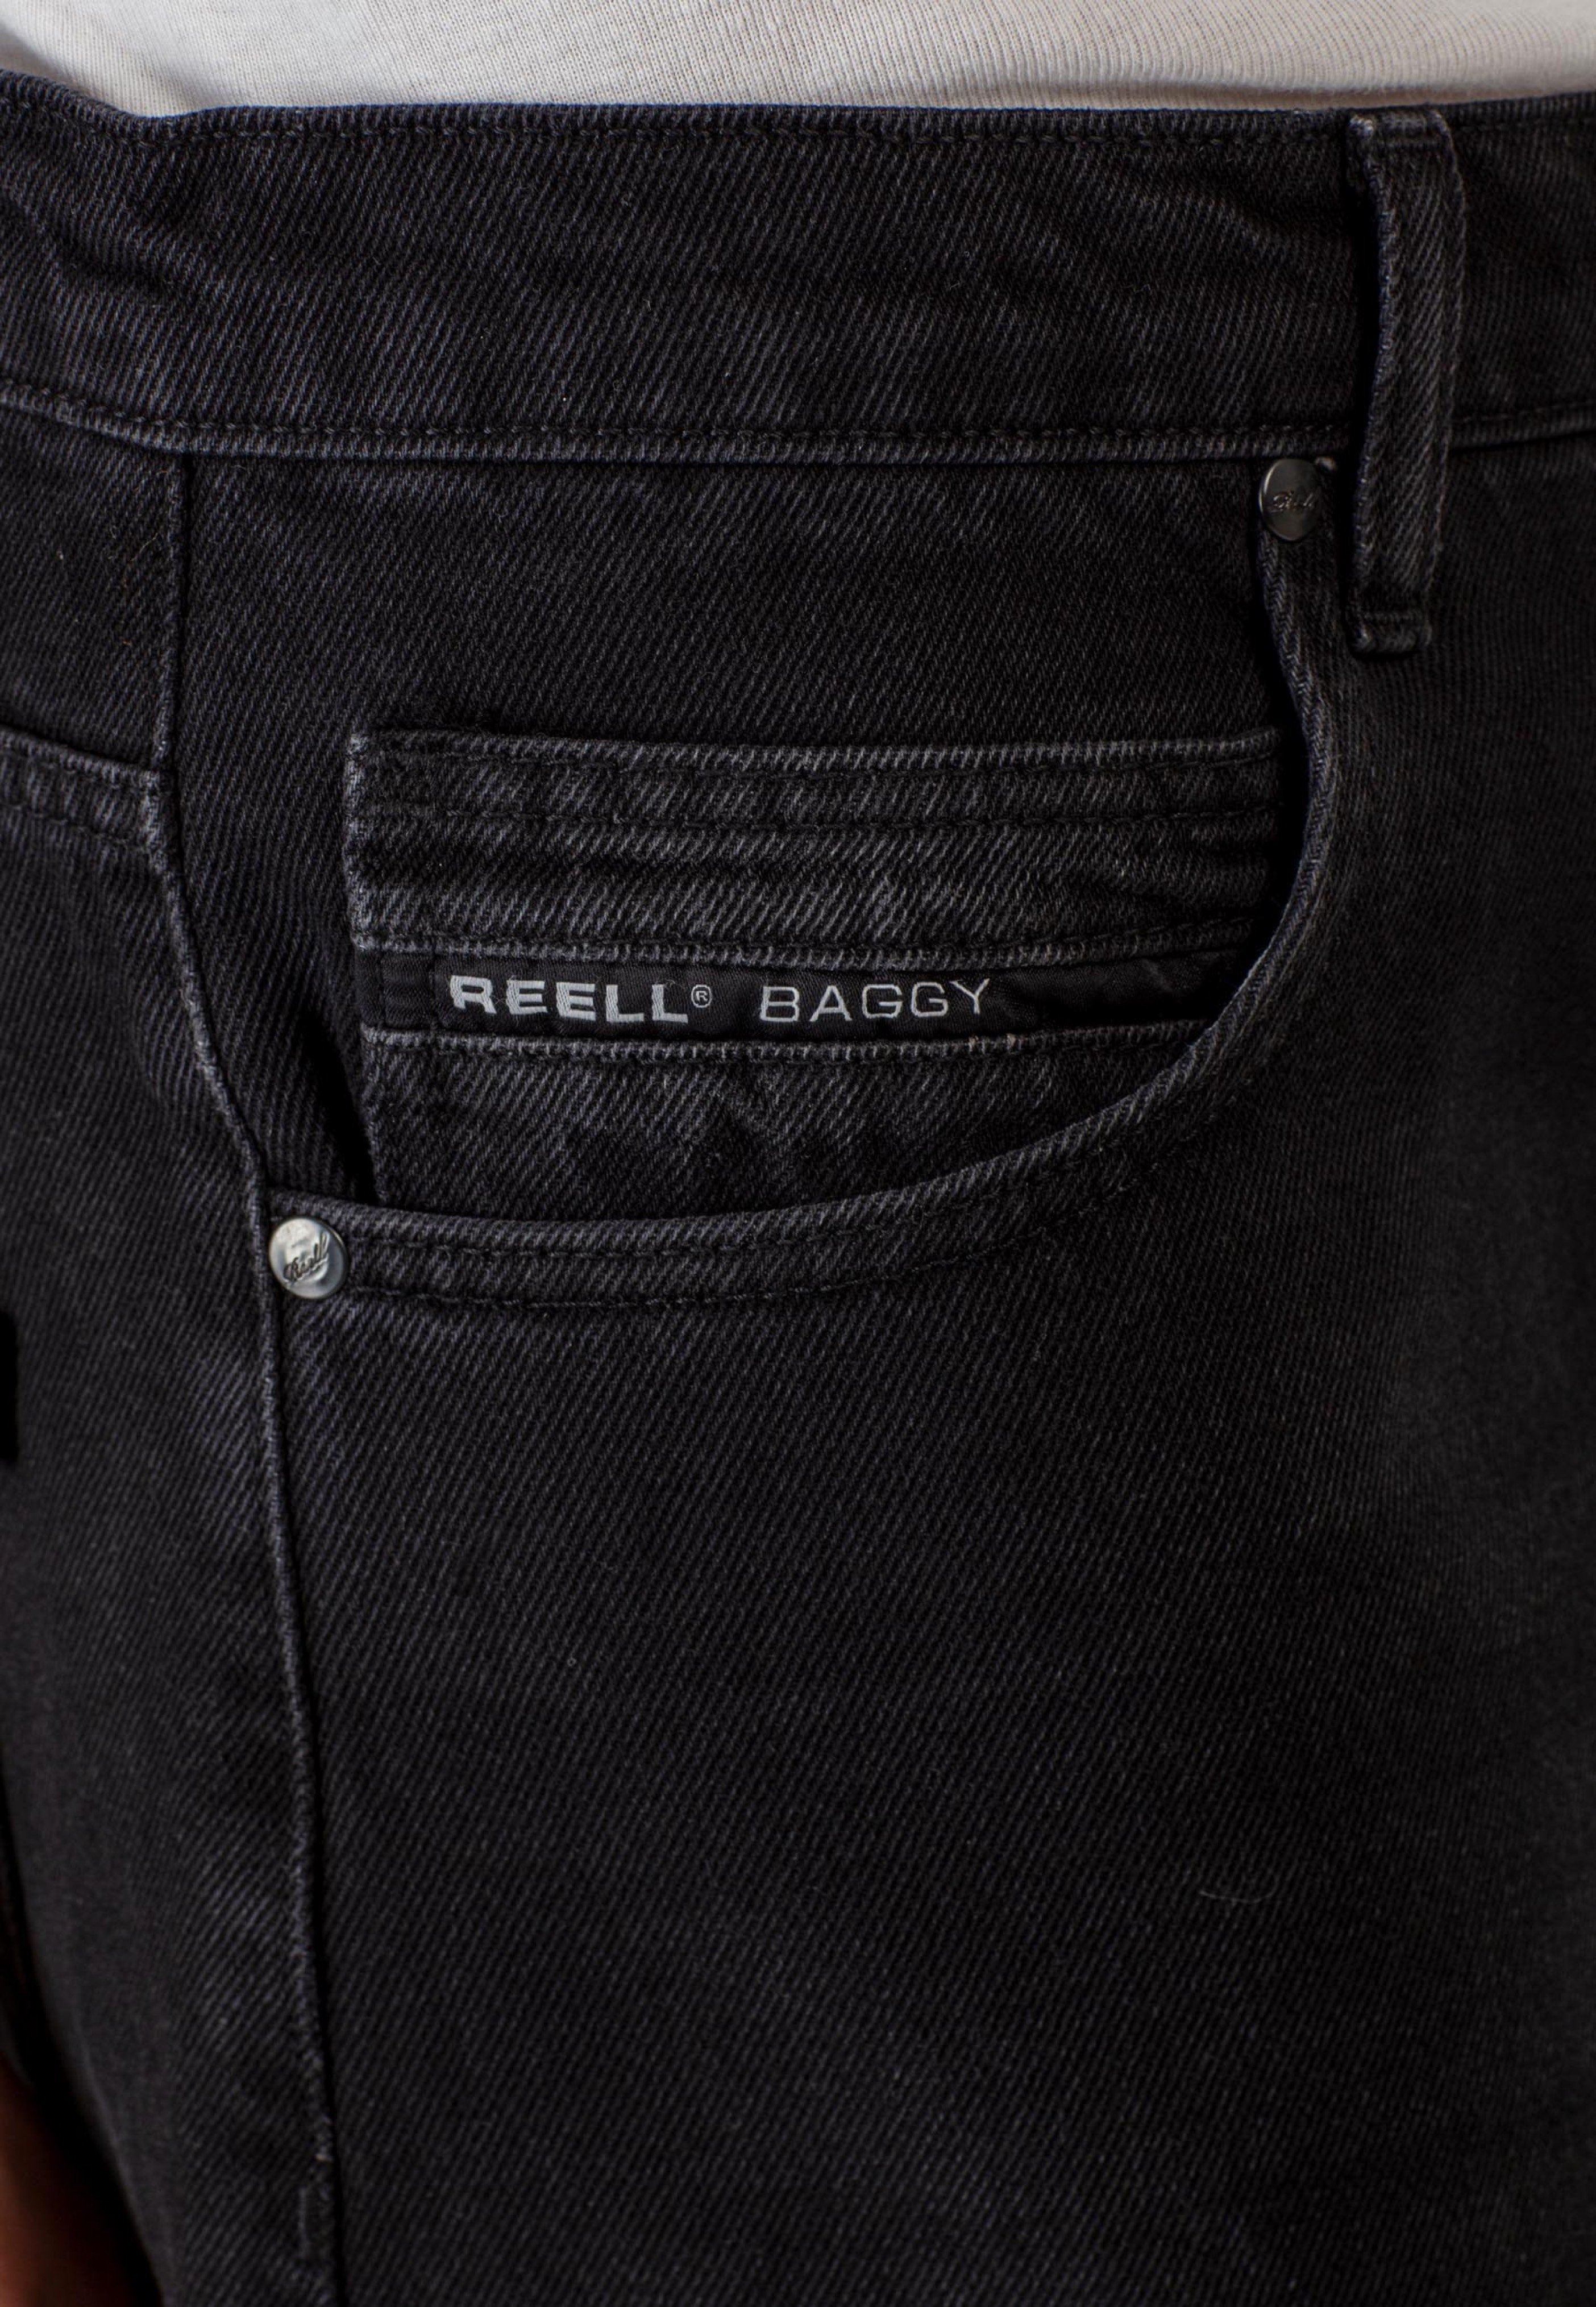 REELL - Baggy Black Wash - Jeans